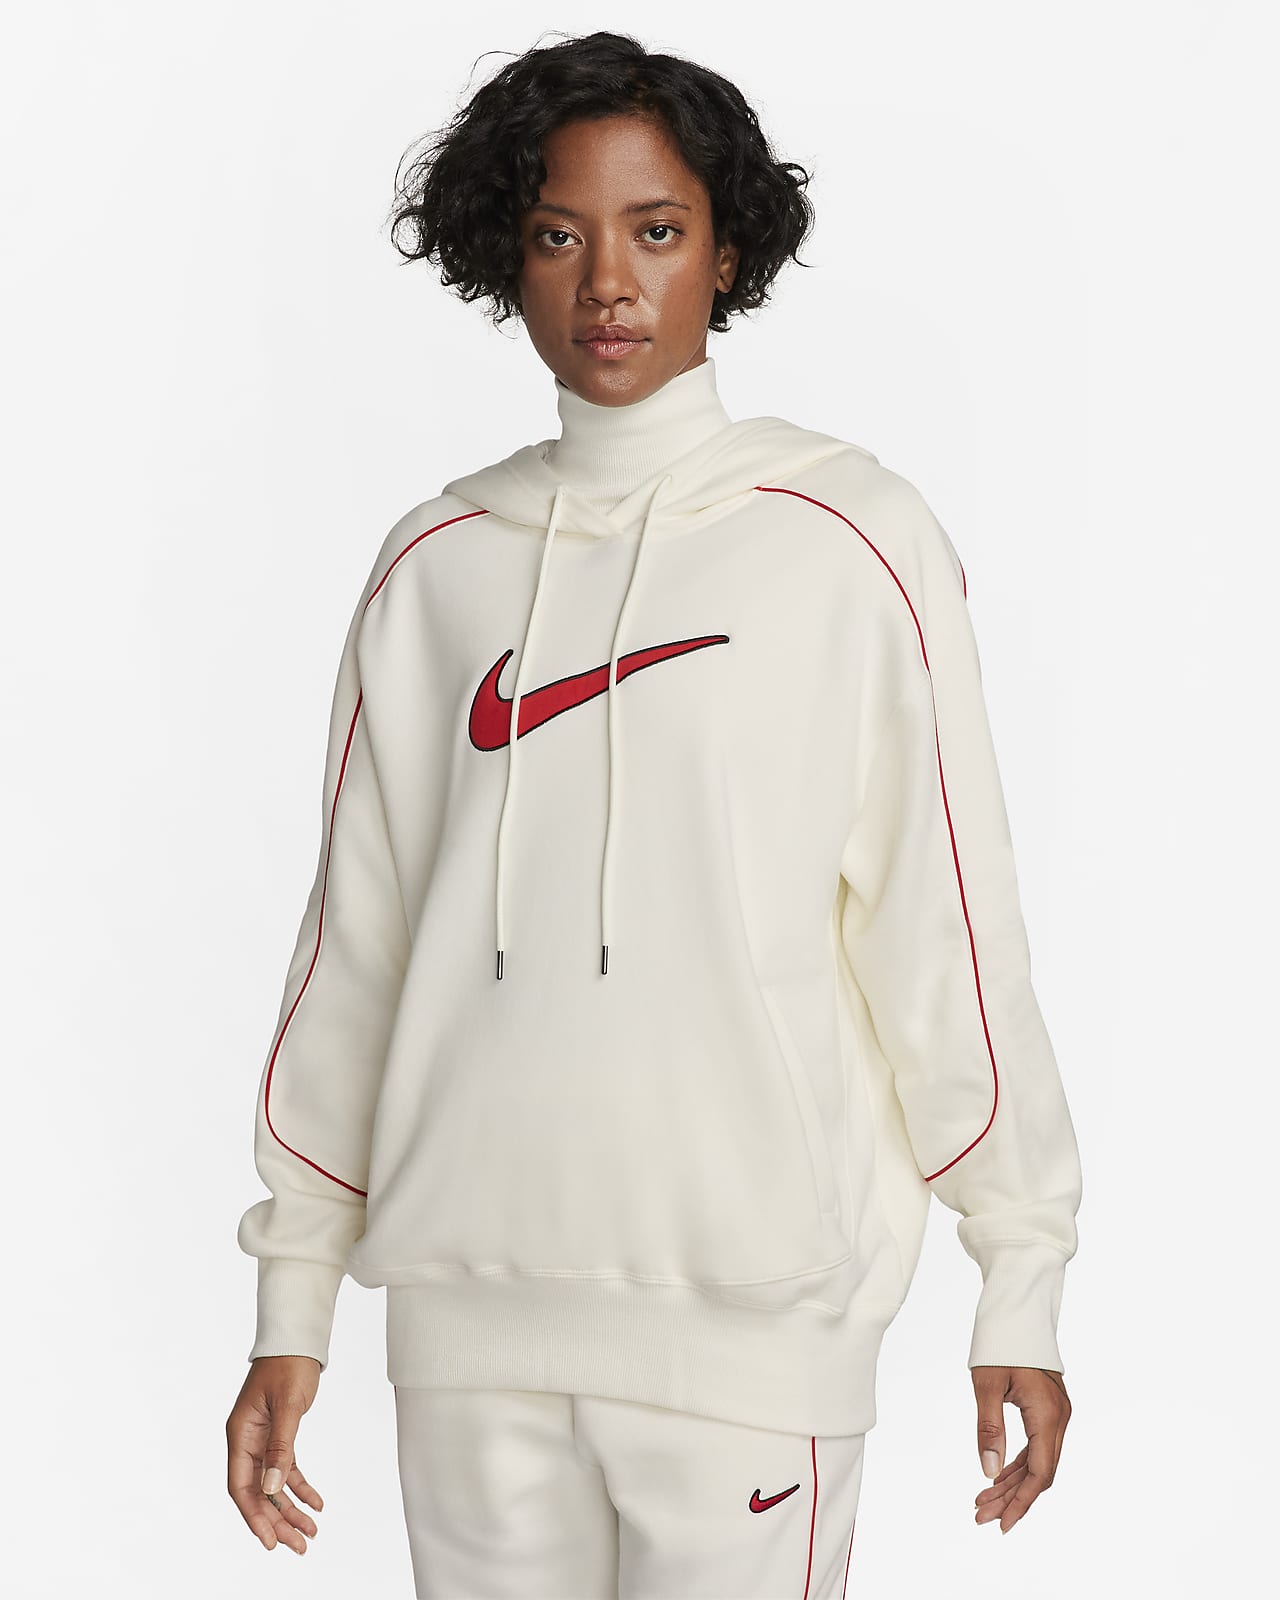 https://static.nike.com/a/images/t_PDP_1280_v1/f_auto,q_auto:eco/7c4271bb-4929-40eb-82d2-1e44ea092b38/sportswear-womens-oversized-fleece-pullover-hoodie-nwg8SZ.png